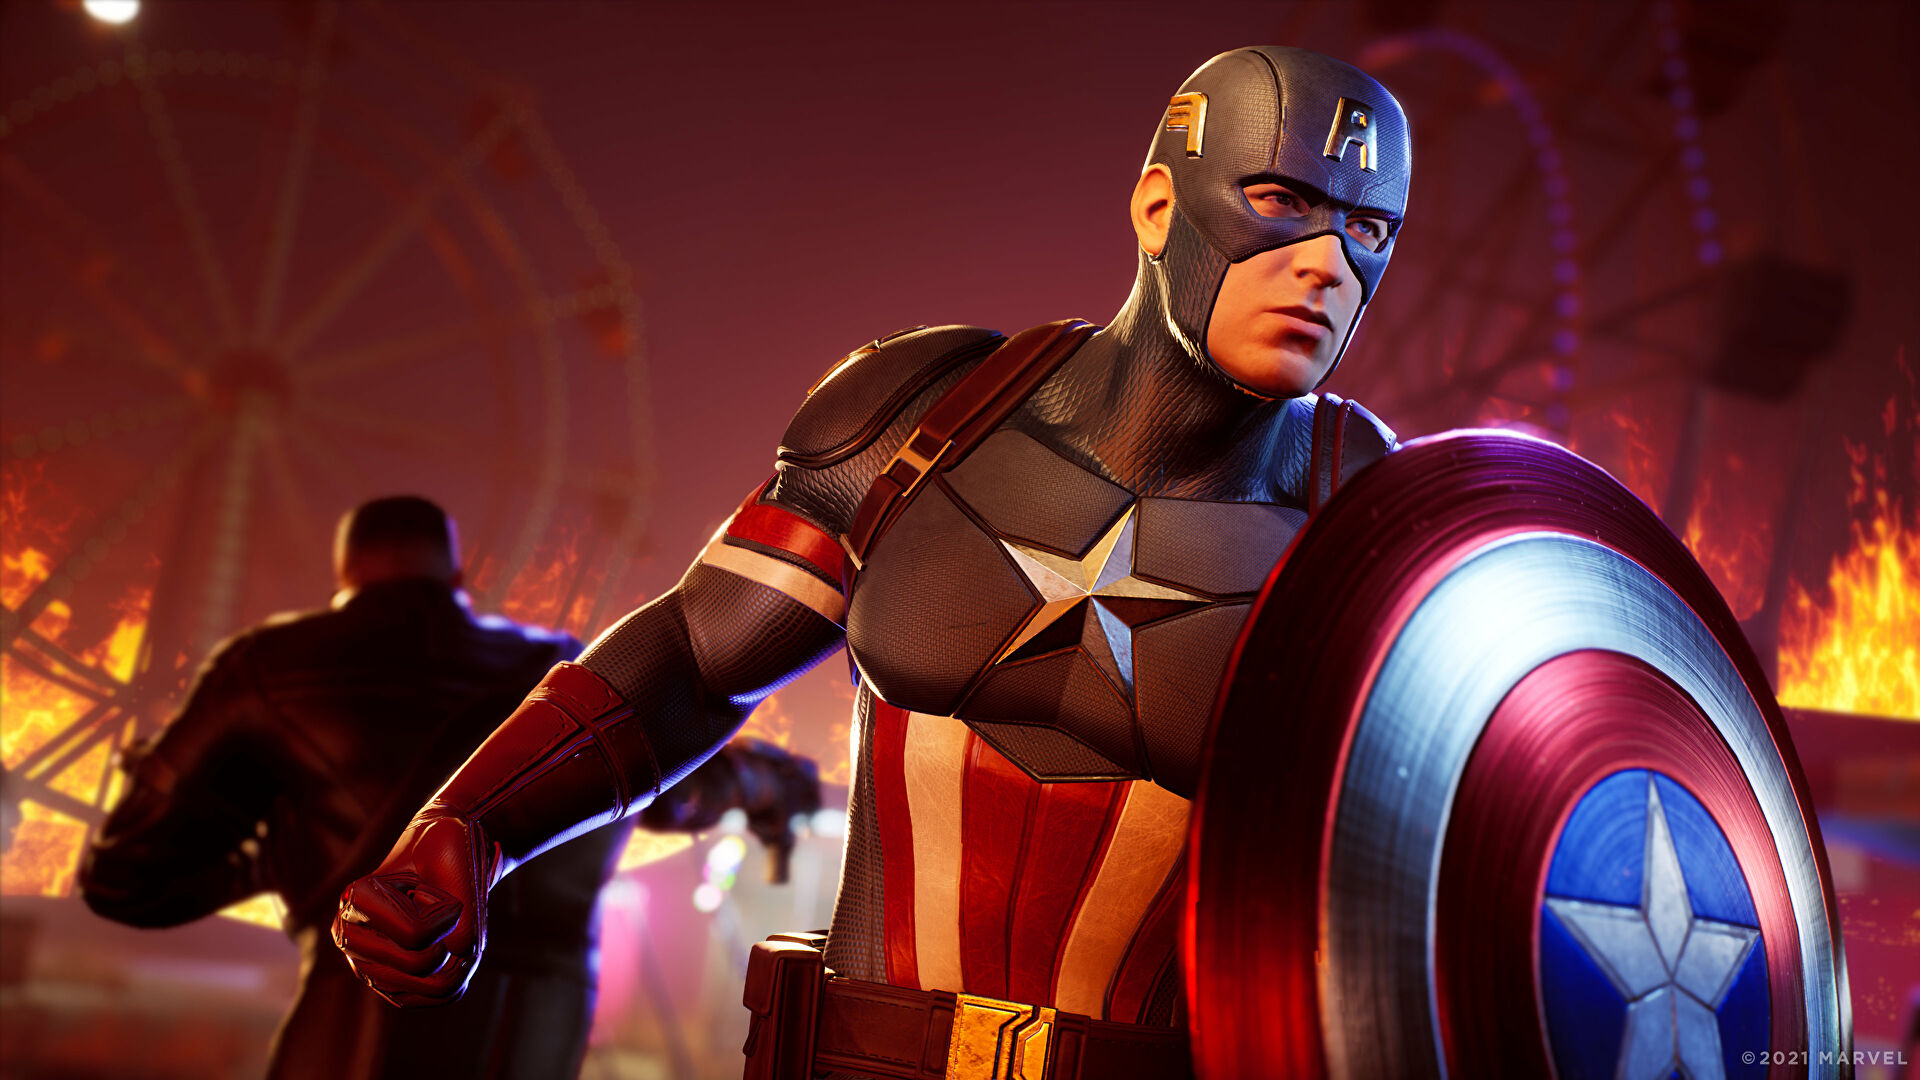 Details from Amy Hennig’s Marvel game emerge ahead of today’s Disney & Marvel Games Showcase